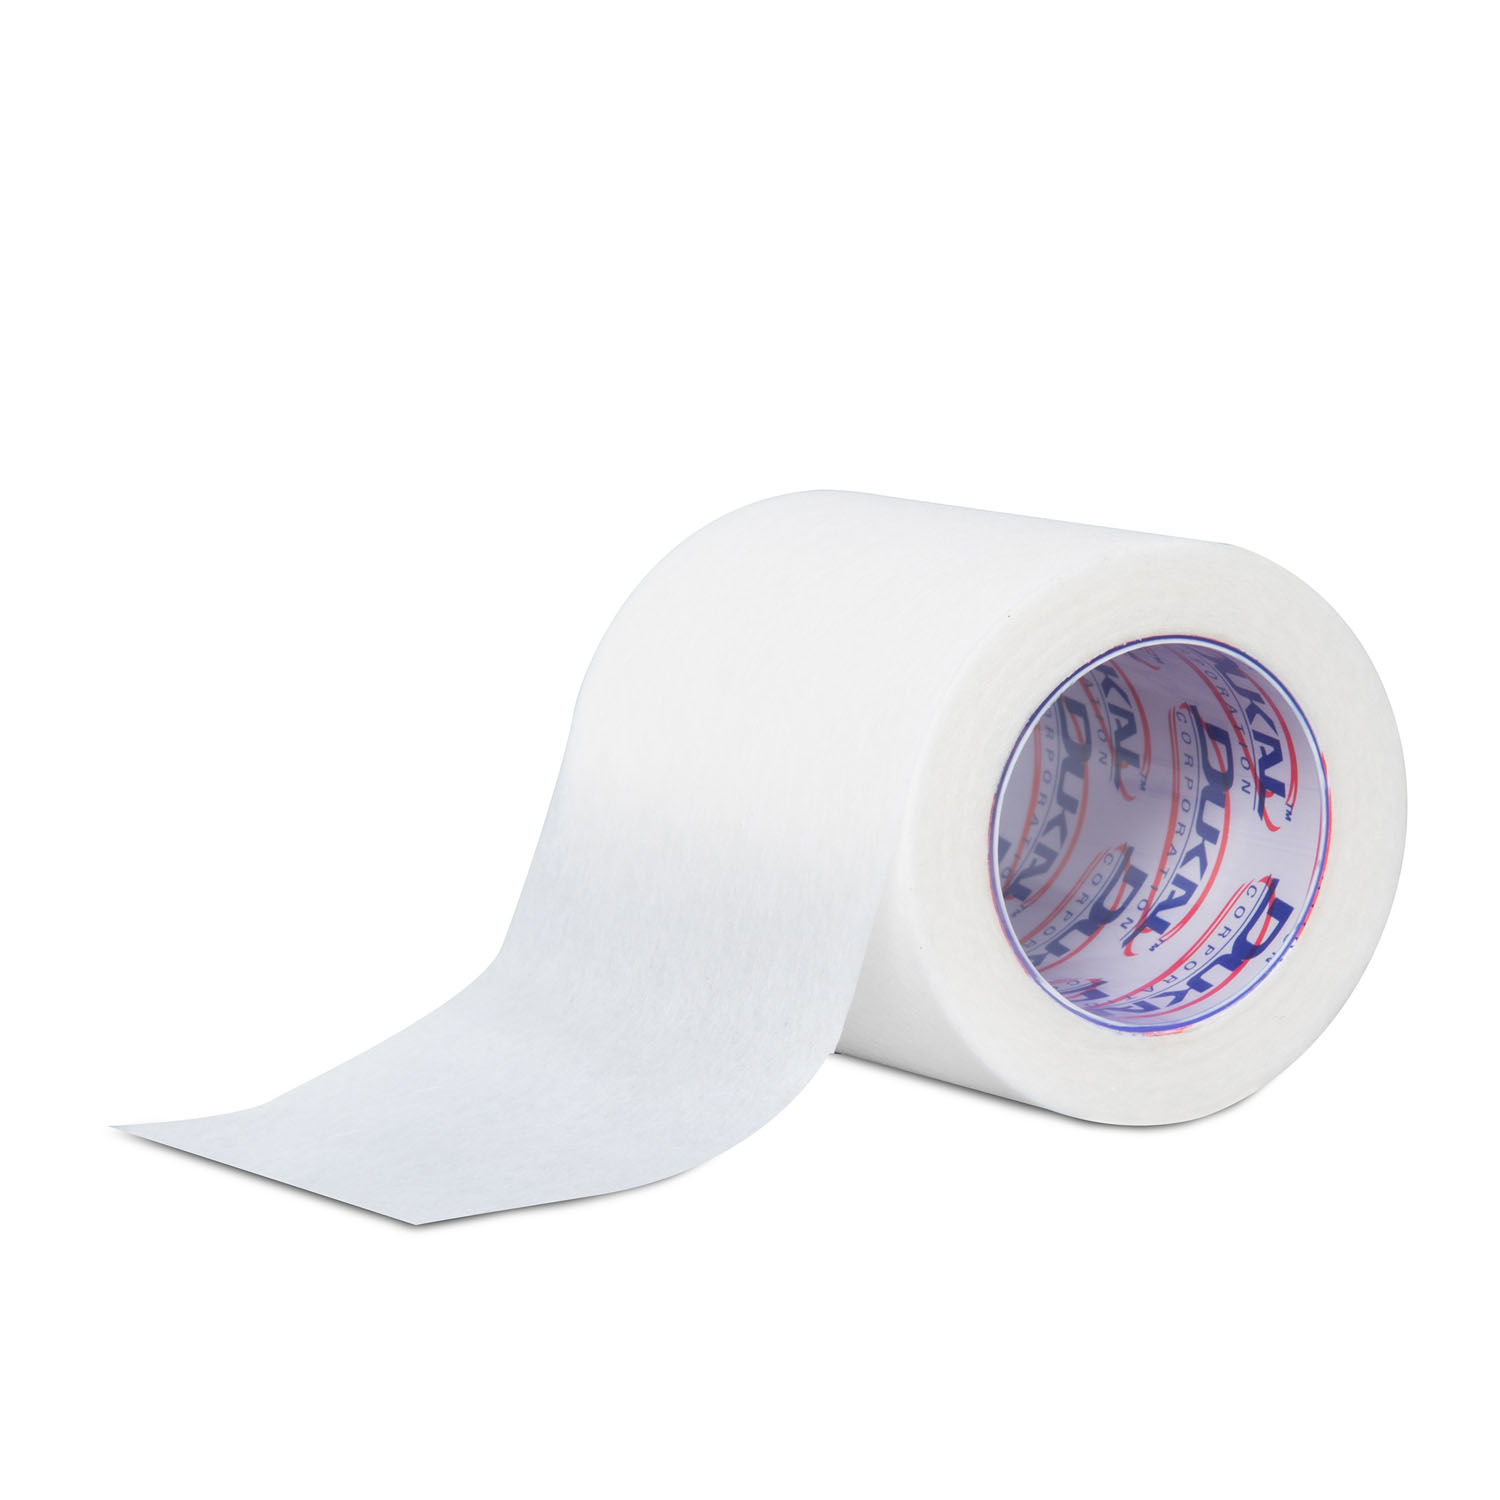 DUKAL SURGICAL TAPE - PAPER : P210 CS $86.51 Stocked